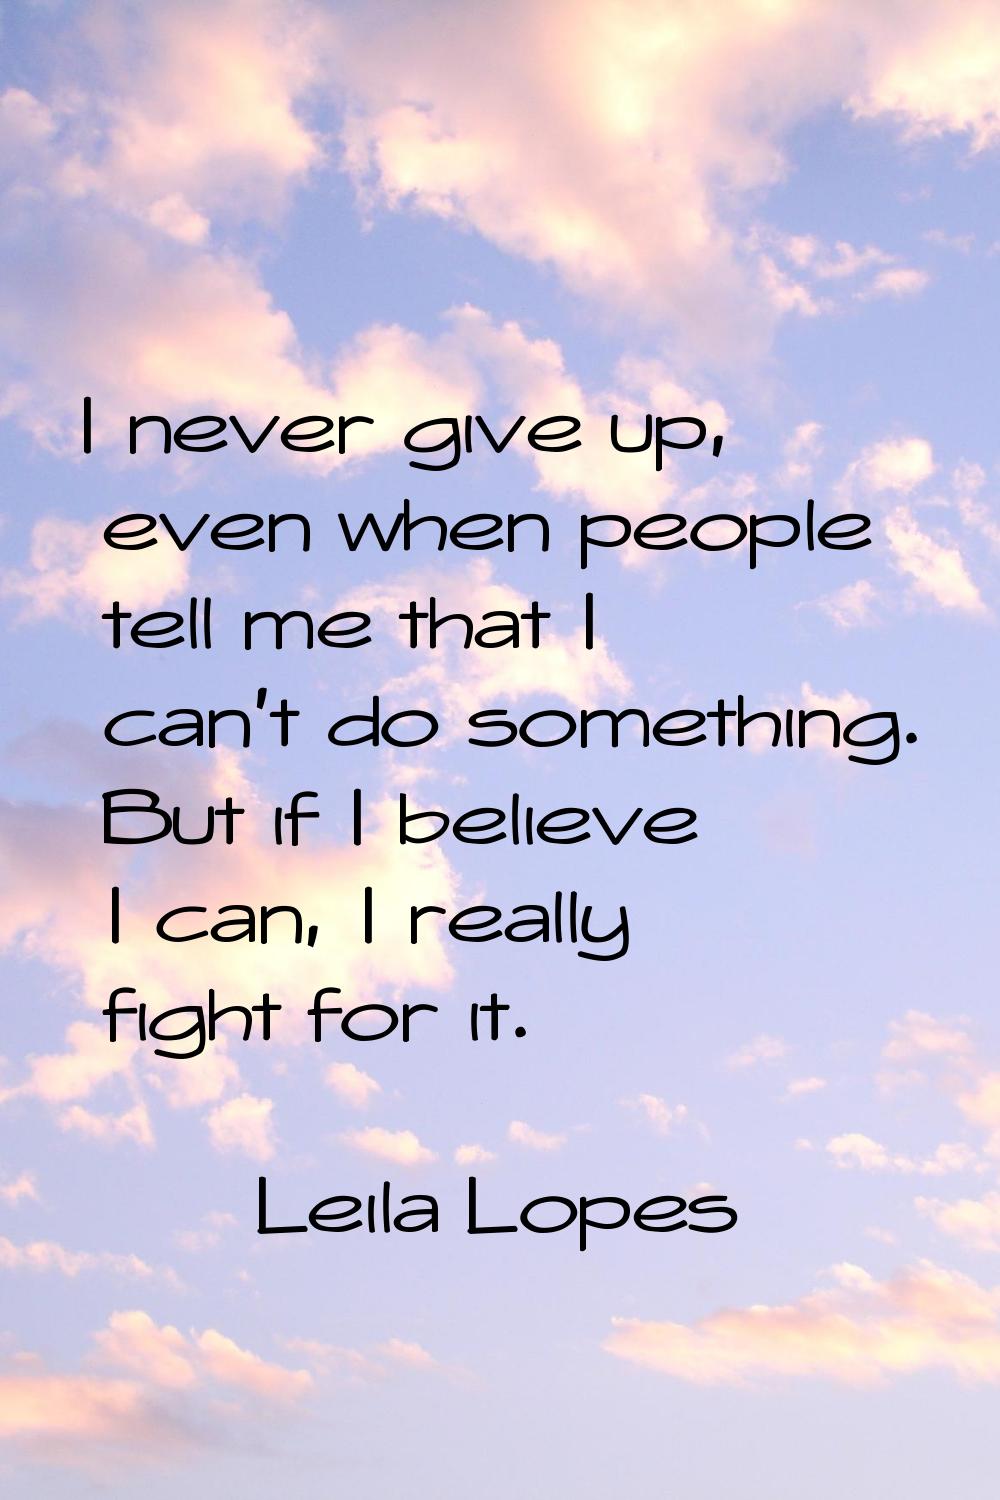 I never give up, even when people tell me that I can't do something. But if I believe I can, I real